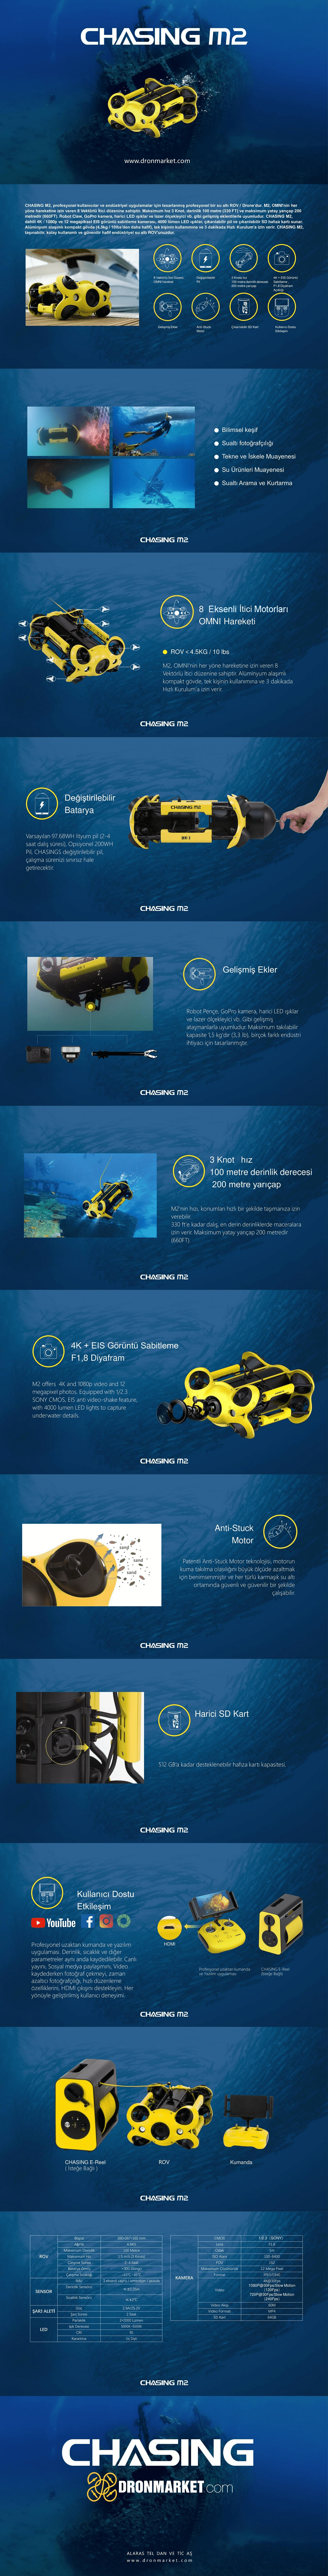 The Gladius M2 Underwater Drone is a smart underwater drone for filming, observing. Capable of taking Ultra HD 1080P/4K photos and videos